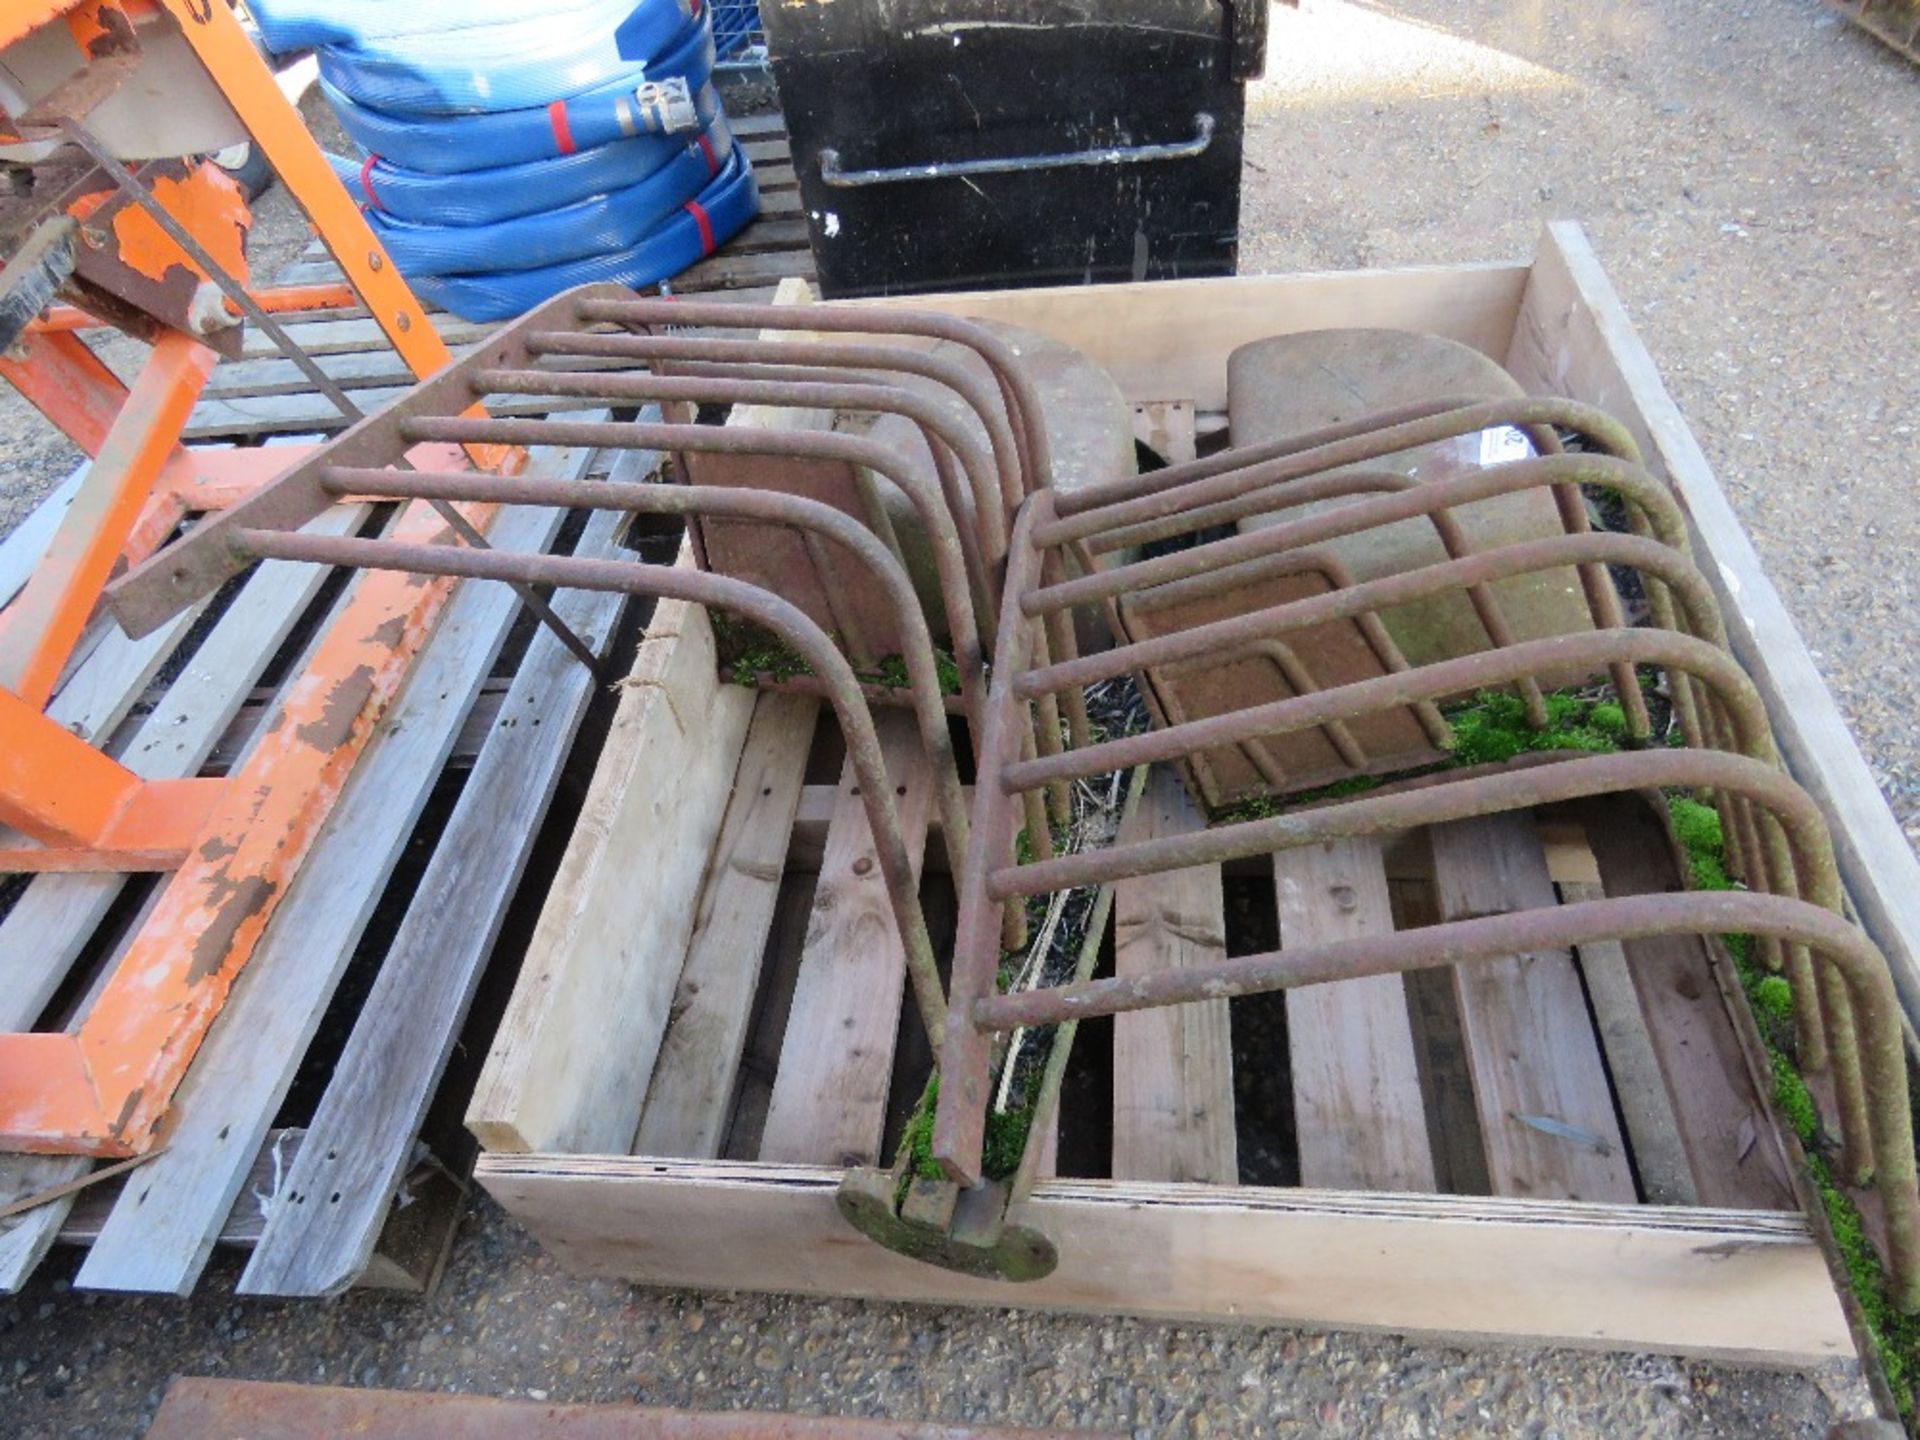 2 CAST IRON MANGERS/ ANIMAL FEEDERS, IDEAL FOR DECORATIVE GARDEN PLANTERS. THIS LOT IS SOLD UNDE - Image 2 of 4